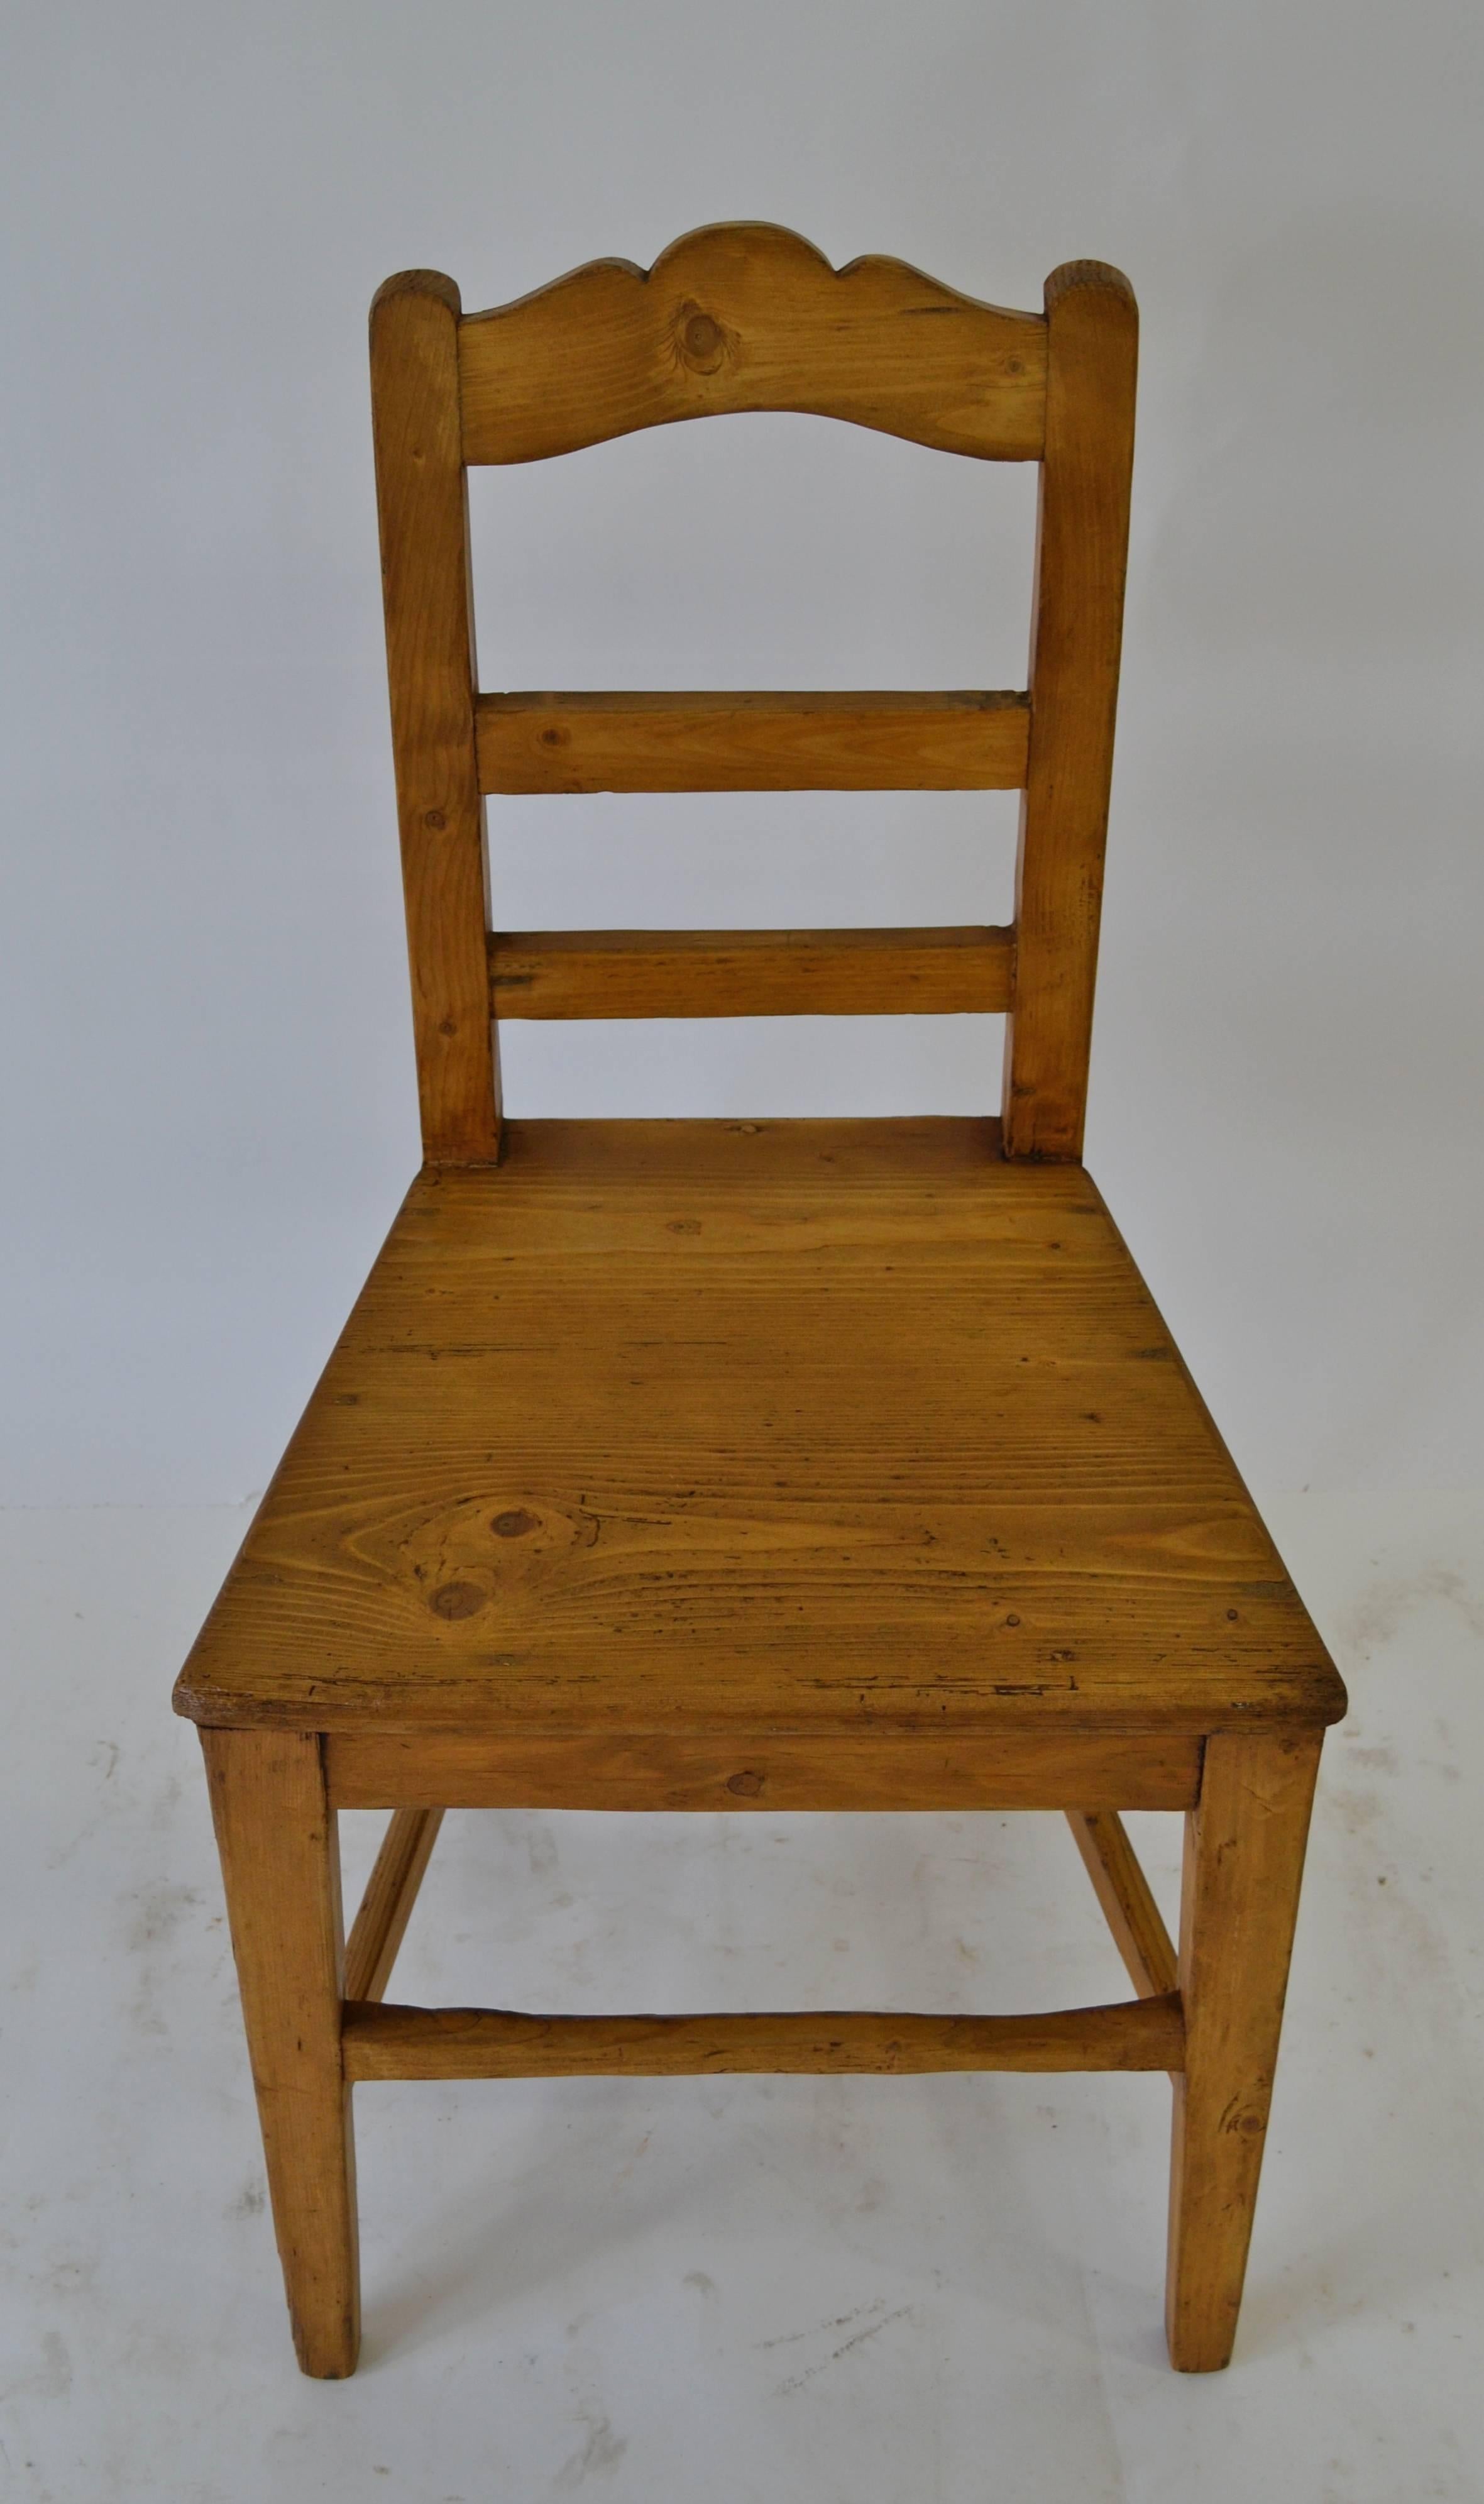 Polished Pine Plank Seat Chair For Sale